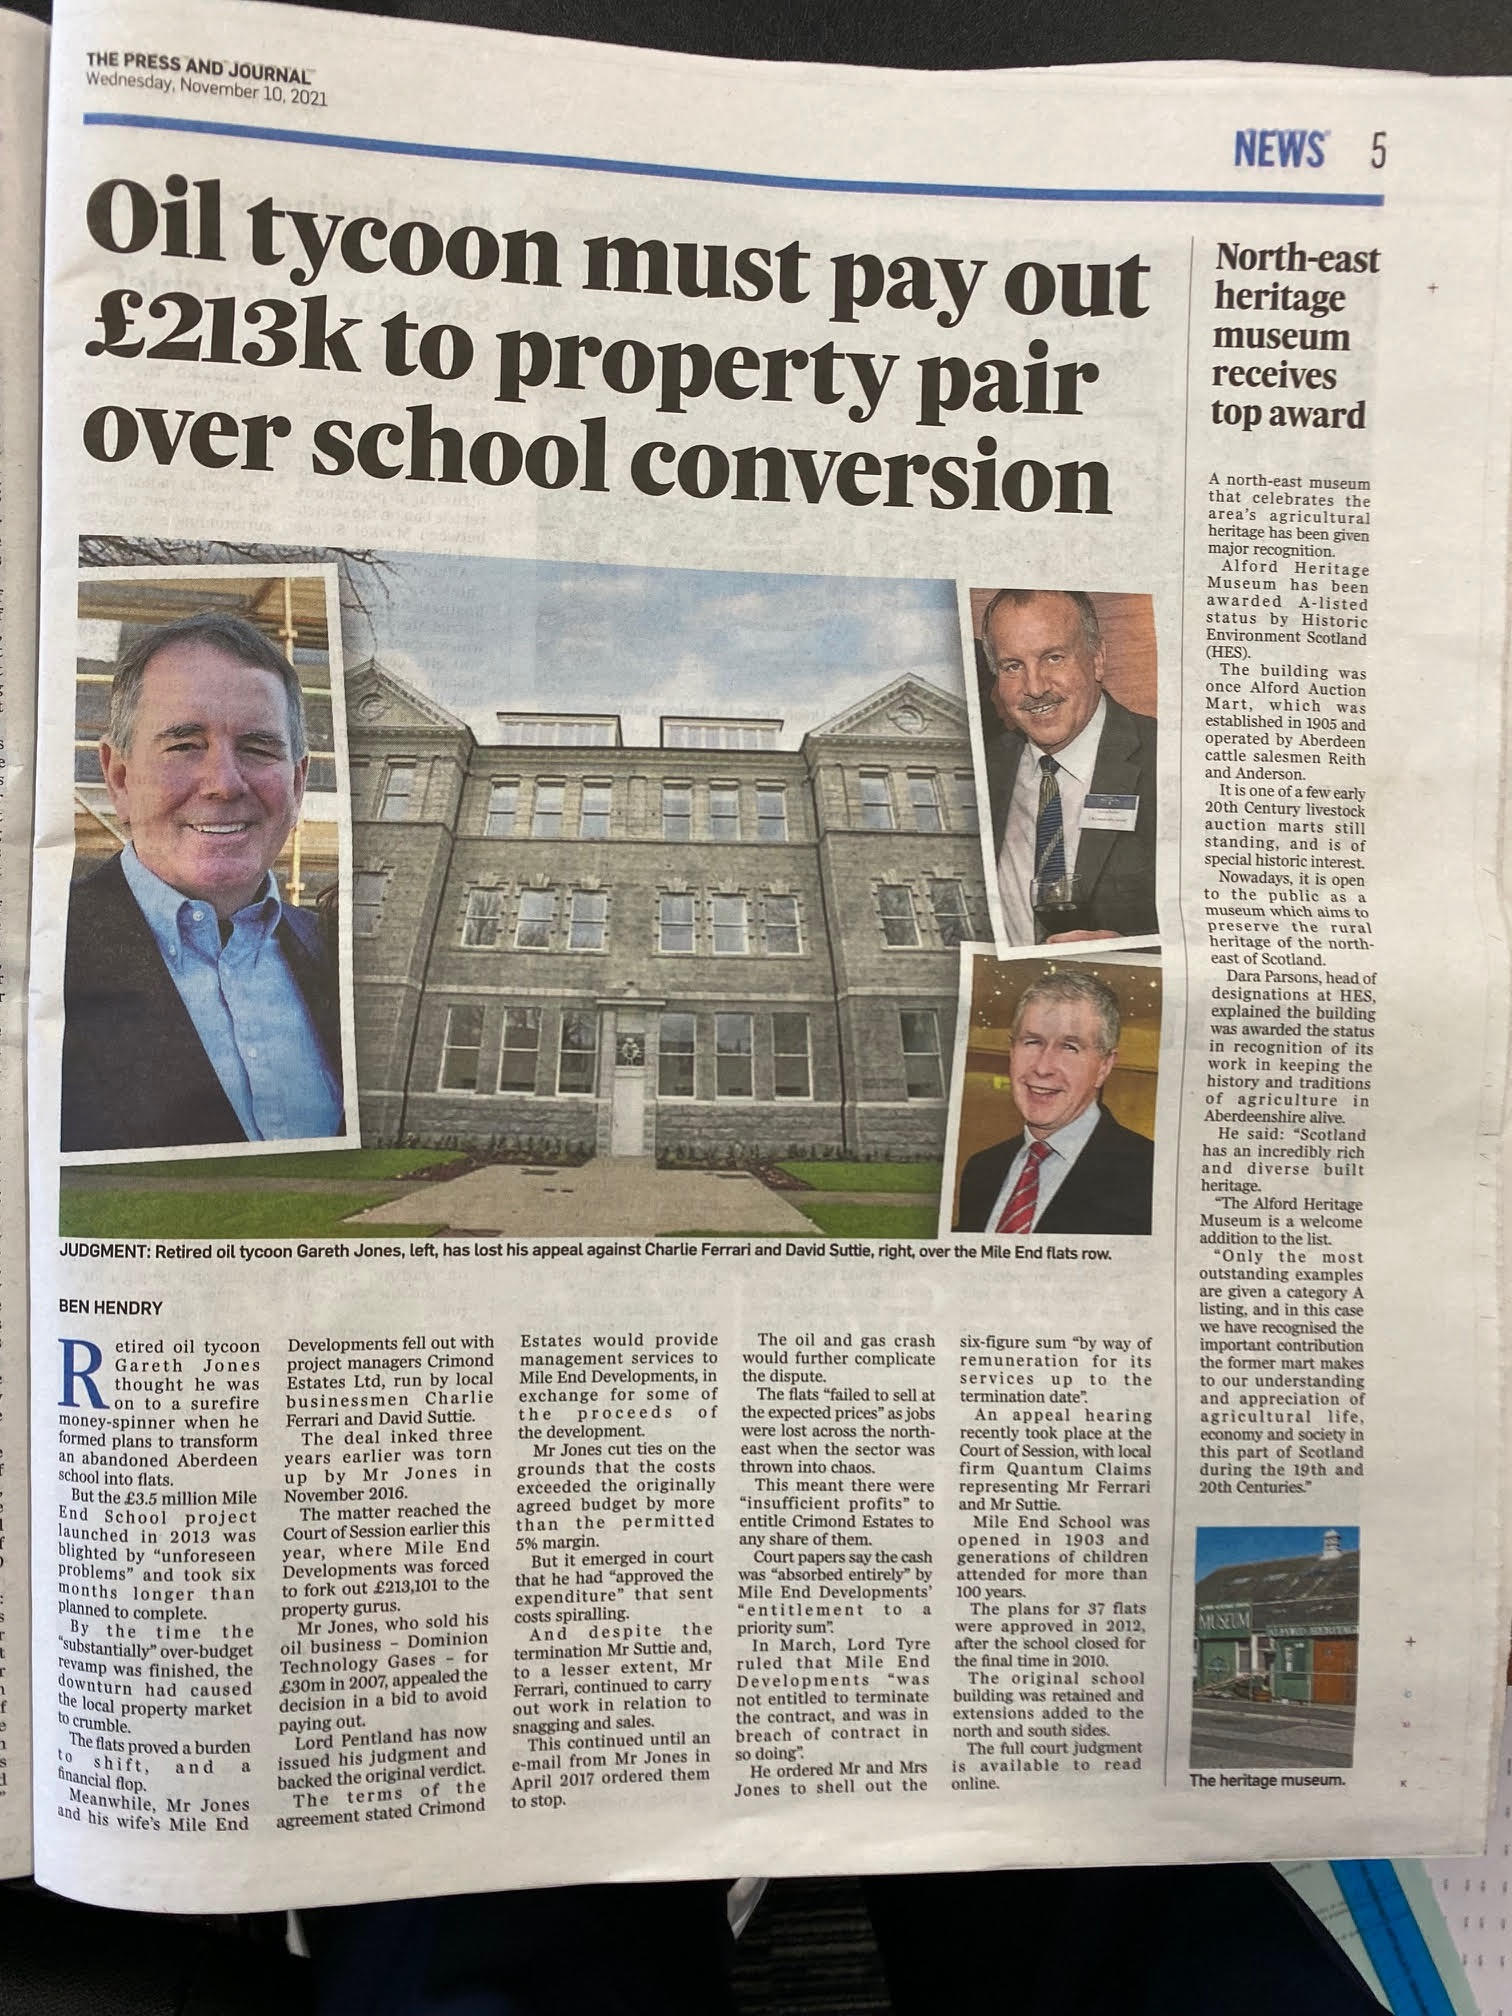 Oil tycoon must pay out £213k to property pair over school conversion